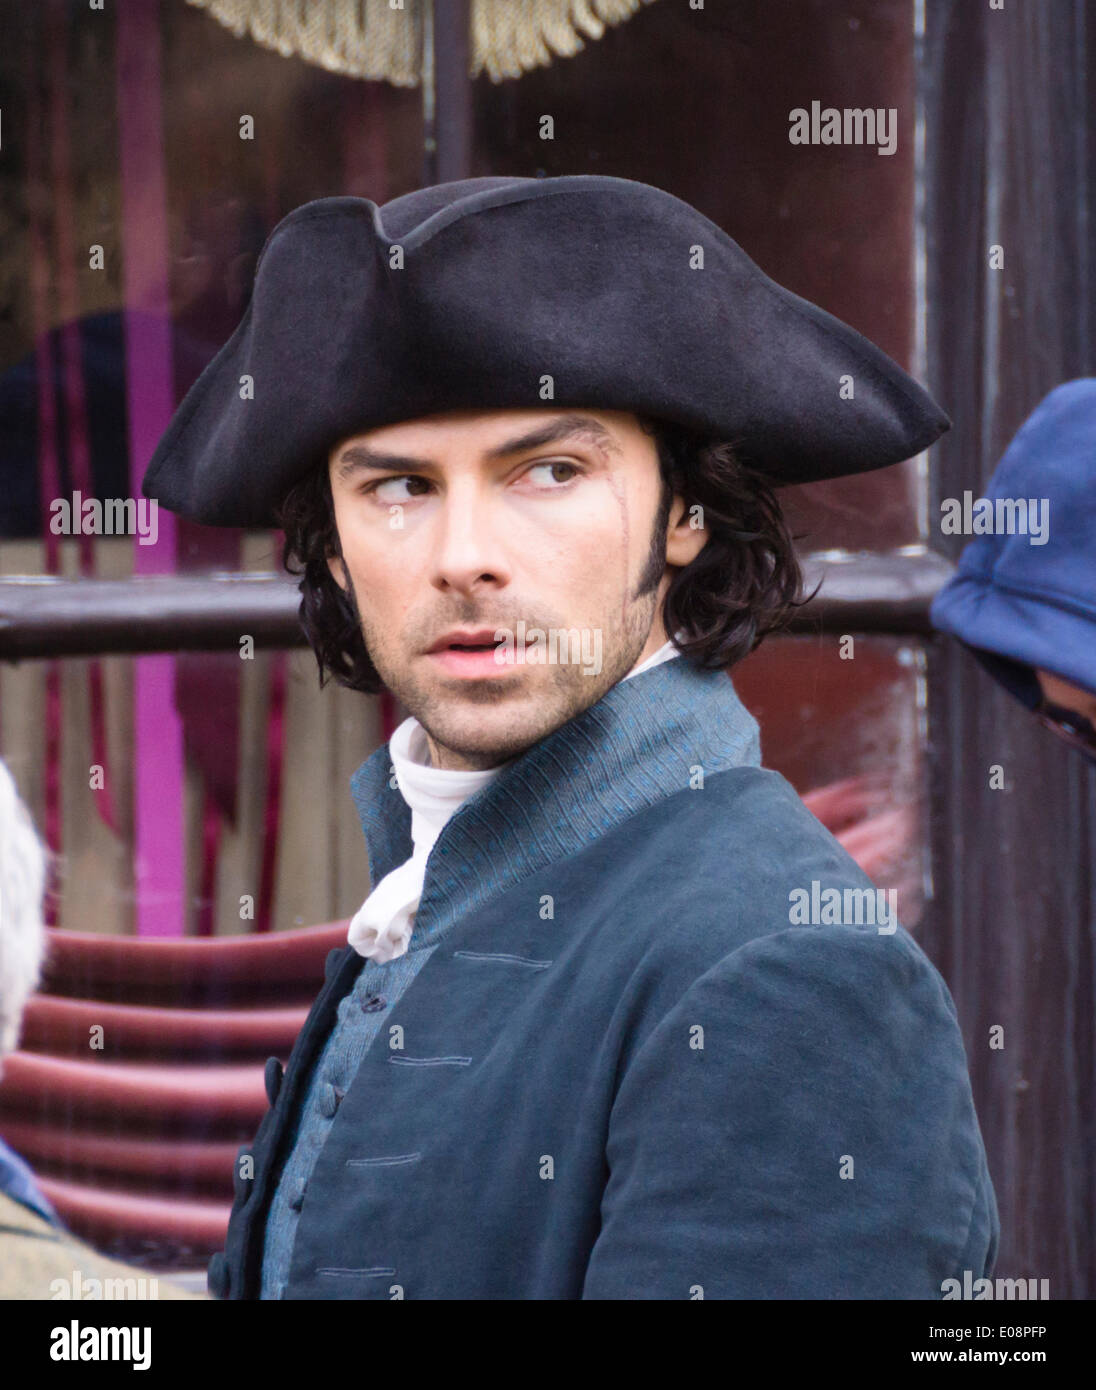 Corsham Wiltshire 6th May 2014  Filming the BBC drama Poldark on location in Corsham Wiltshire. The BBC have taken over this small country town to remake their hit 1970's drama based upon the works of Winston Graham.  Aidan Turner as Ross Poldark Credit:  Mr Standfast/Alamy Live News Stock Photo